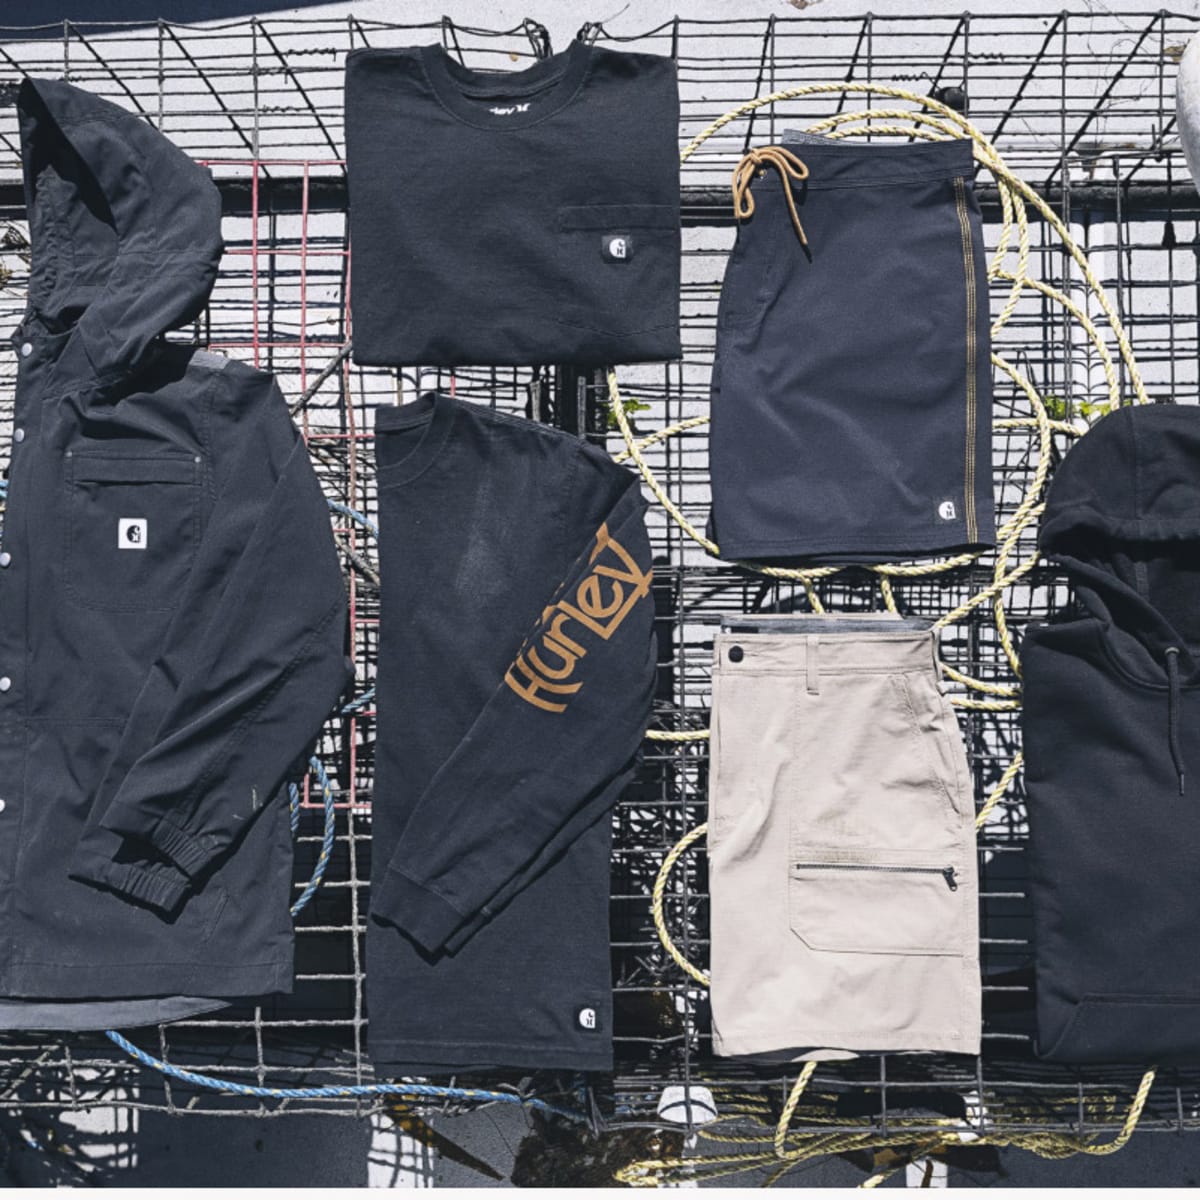 Hurley x Carhartt Collaborate on New Water-Inspired Line of Gear